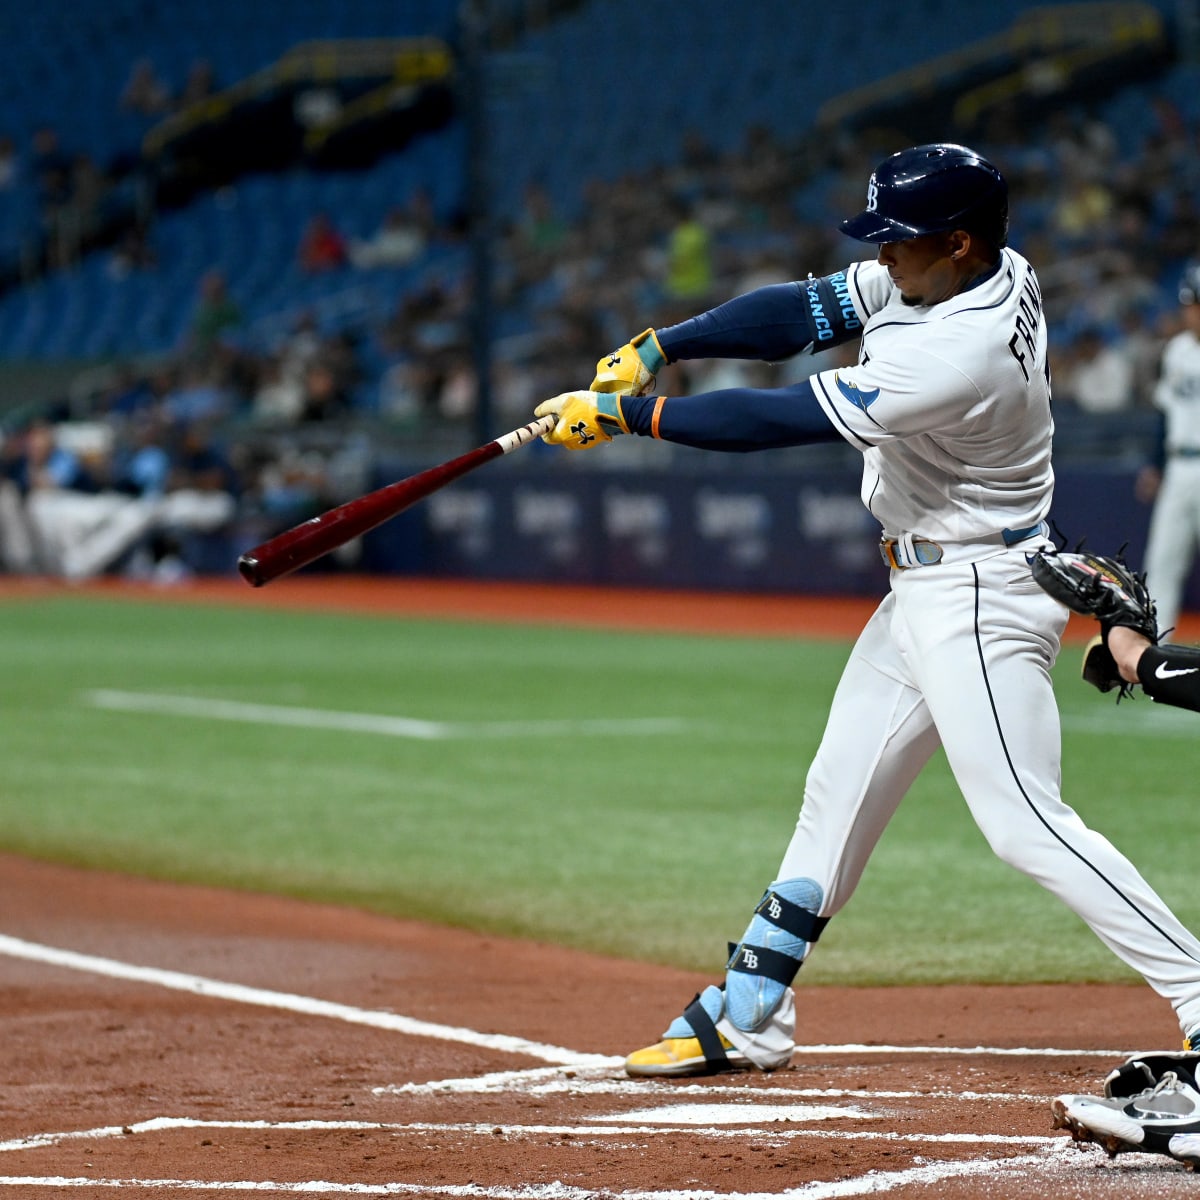 Star Rays shortstop Wander Franco not making trip to SF as MLB looks into  social media posts – KNBR